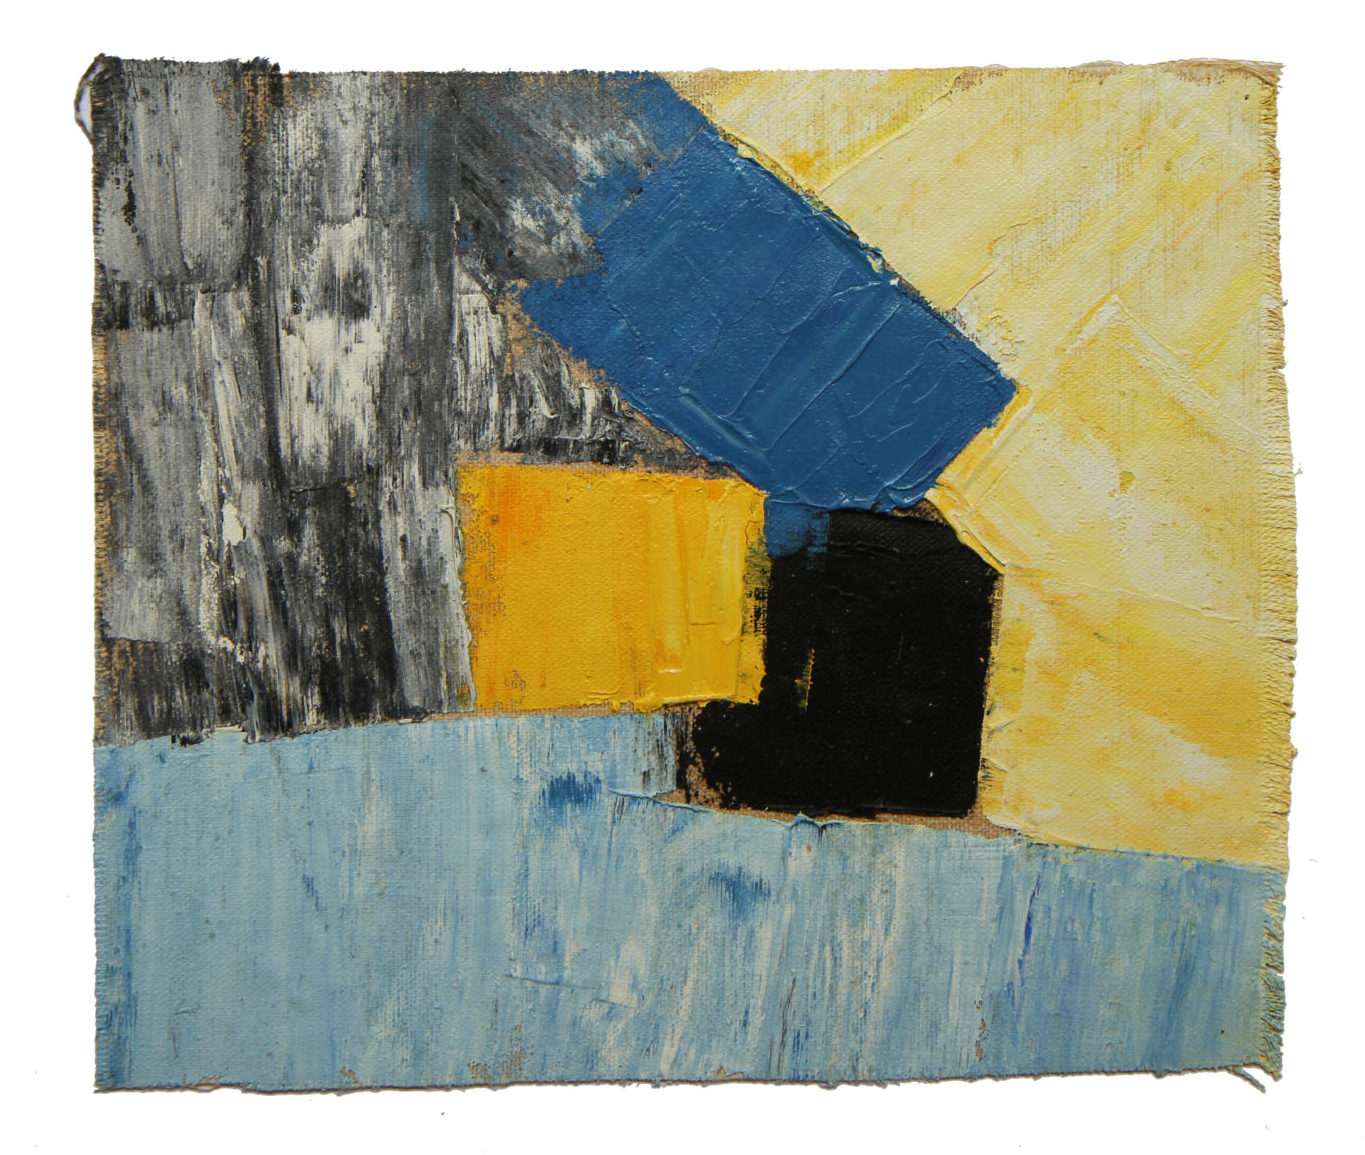 An abstract oil painting comprised of shades of blue, yellow, and grey.